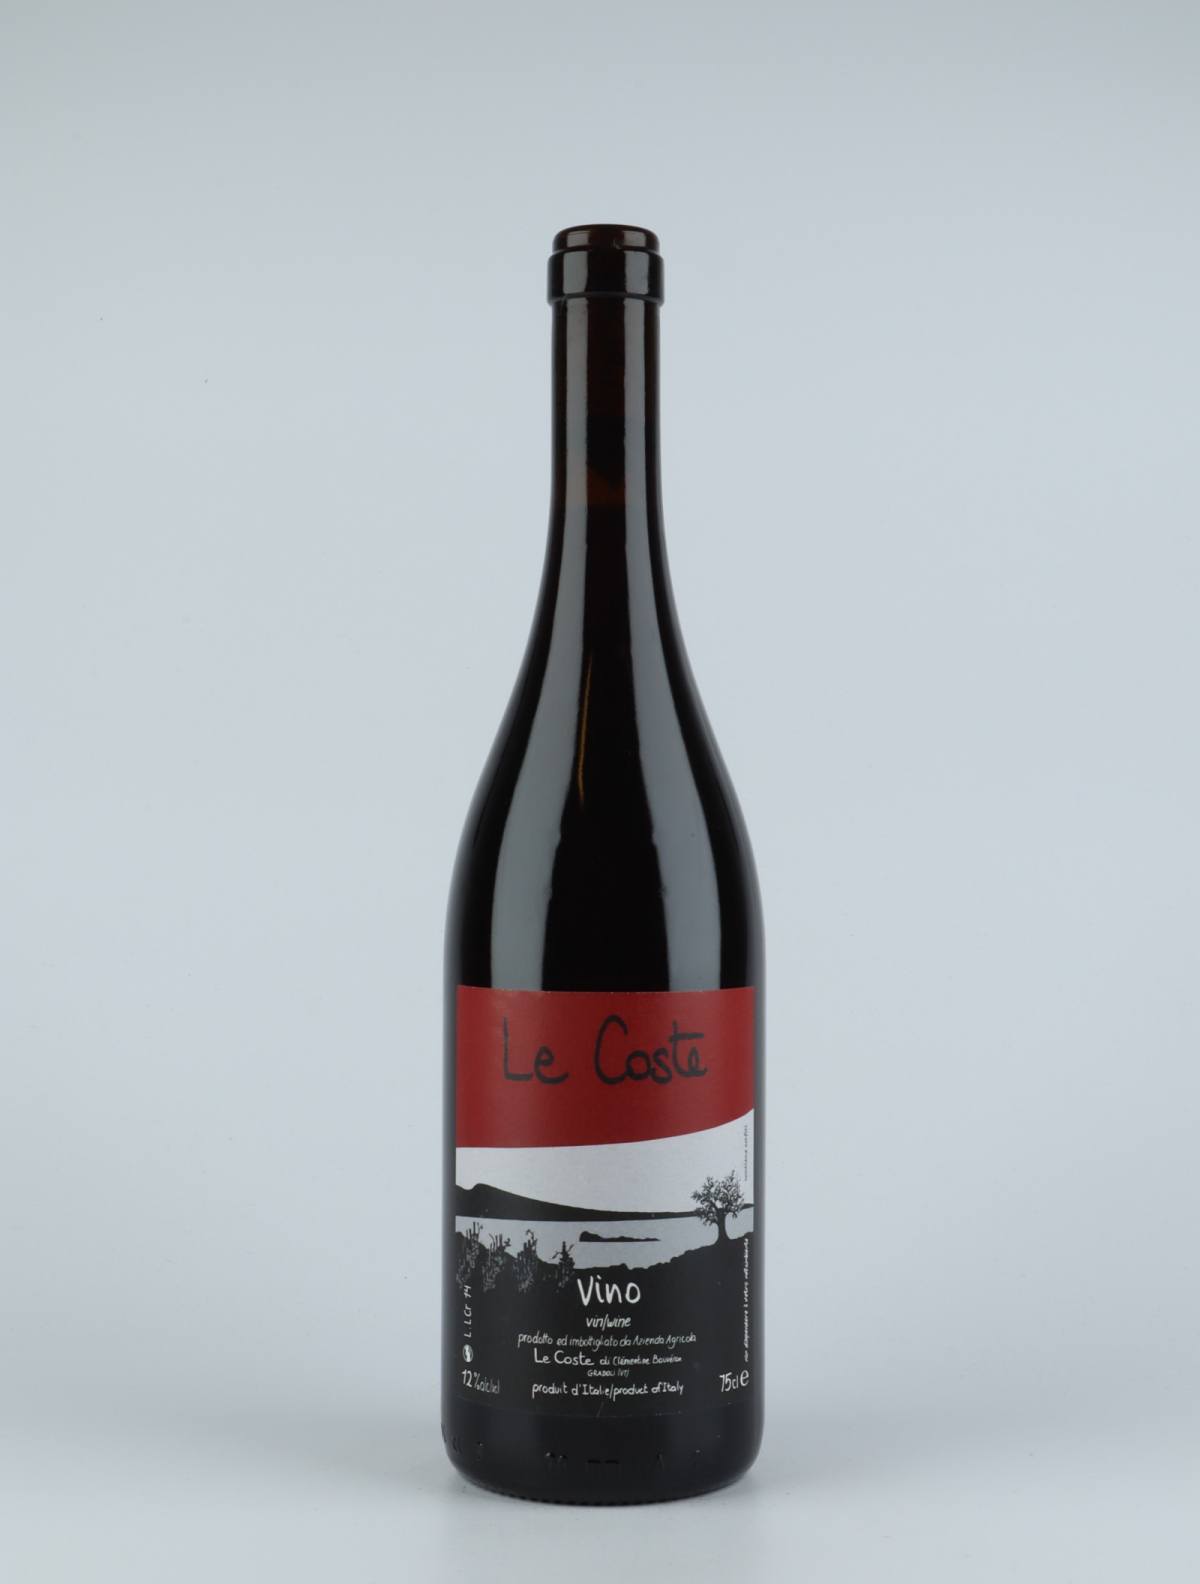 A bottle 2014 Le Coste Rosso Red wine from Le Coste, Lazio in Italy